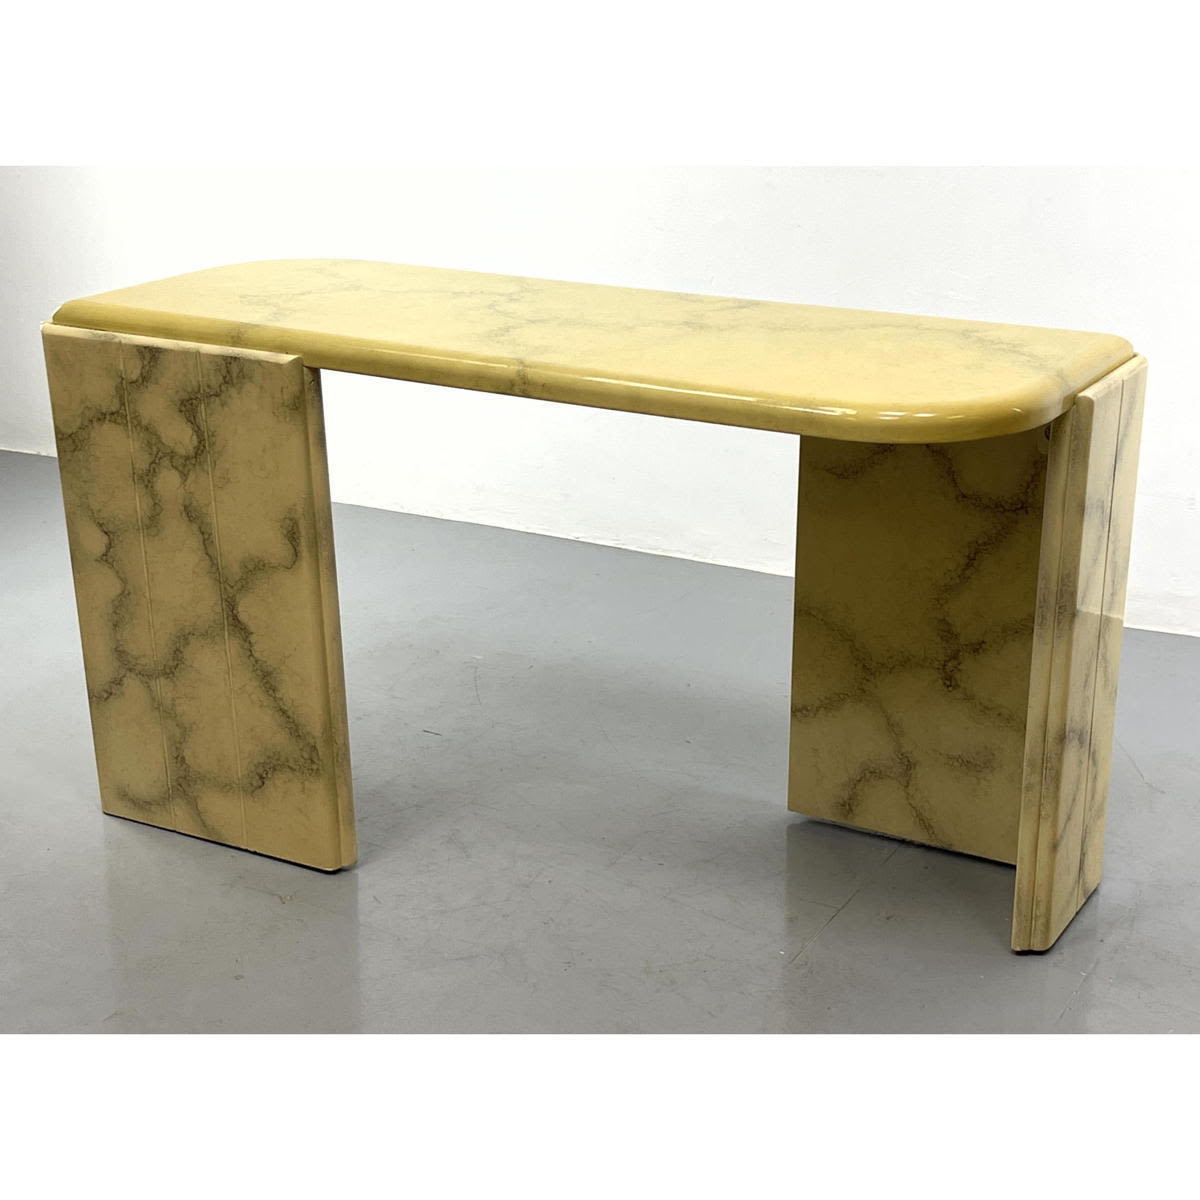 Faux Marble Painted Console Tables.